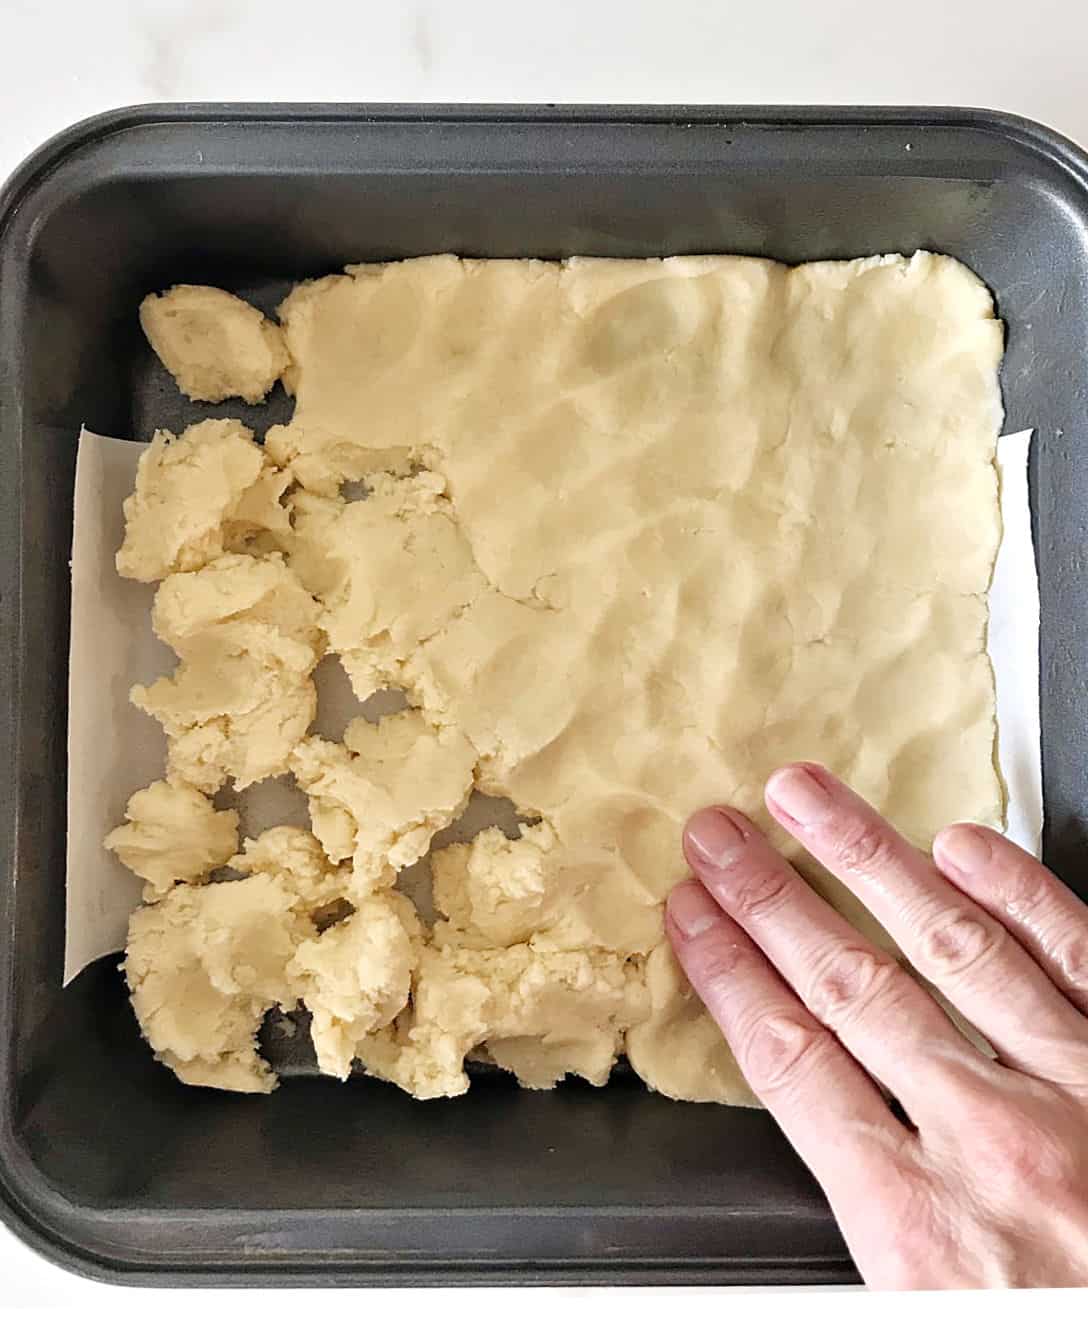 Patting shortbread in a square metal pan with parchment paper.